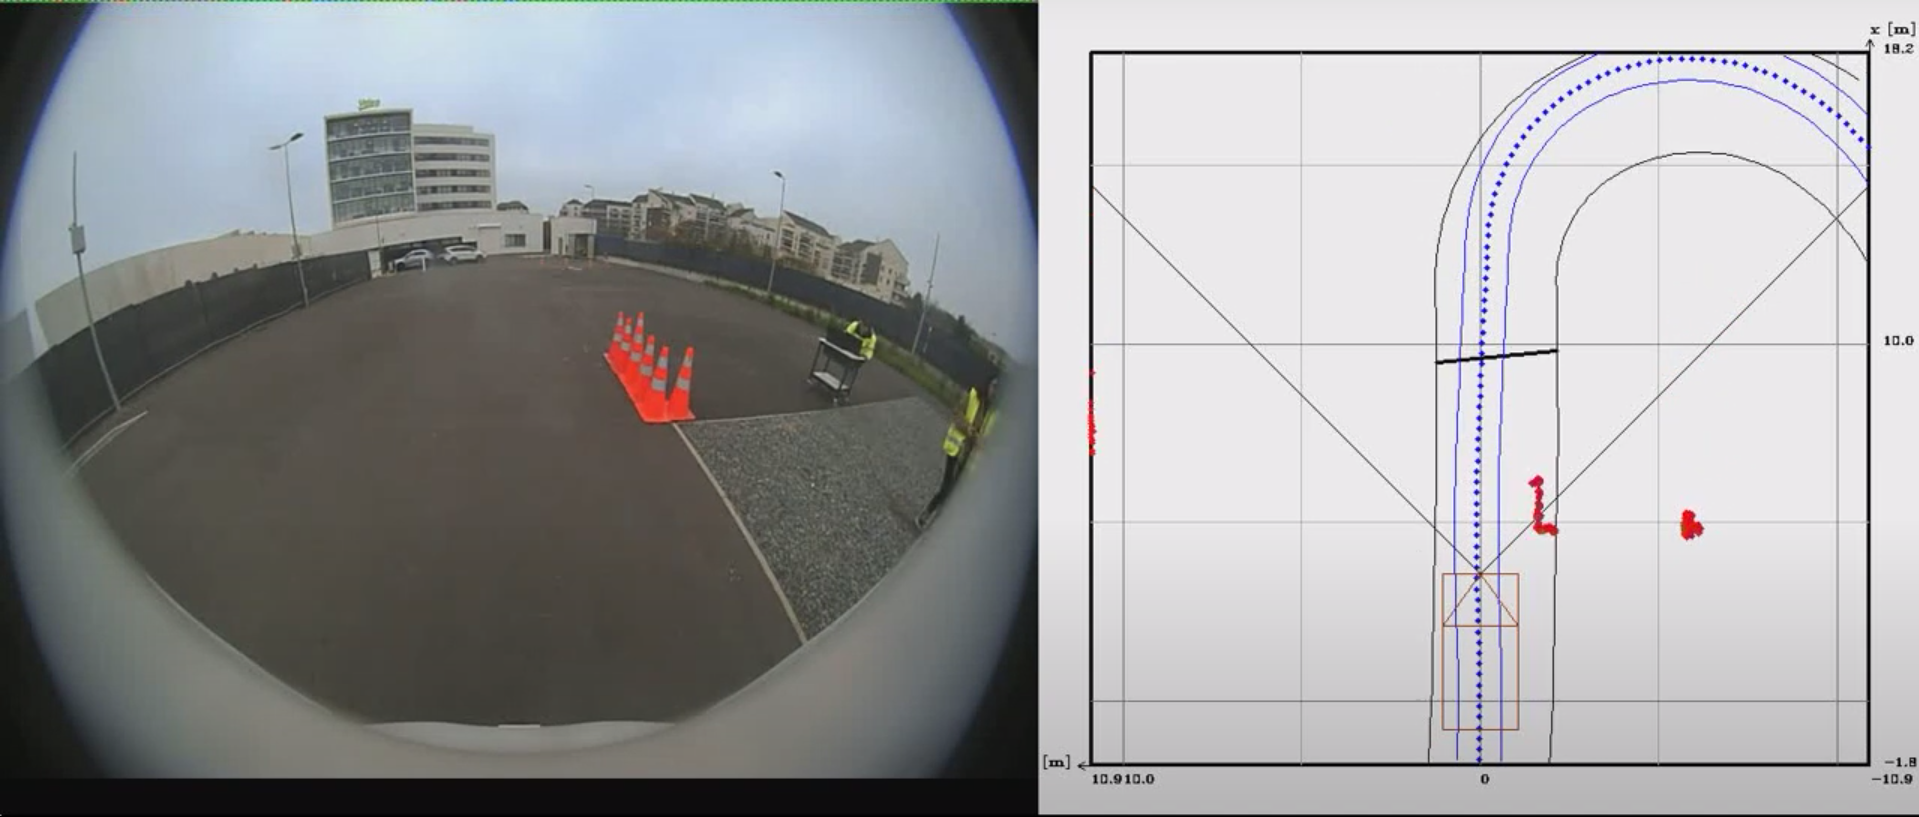 Motion Planner module generating trajectory for avoidance of static obstacles from point cloud integrated into eDeliver4U delivery vehicle